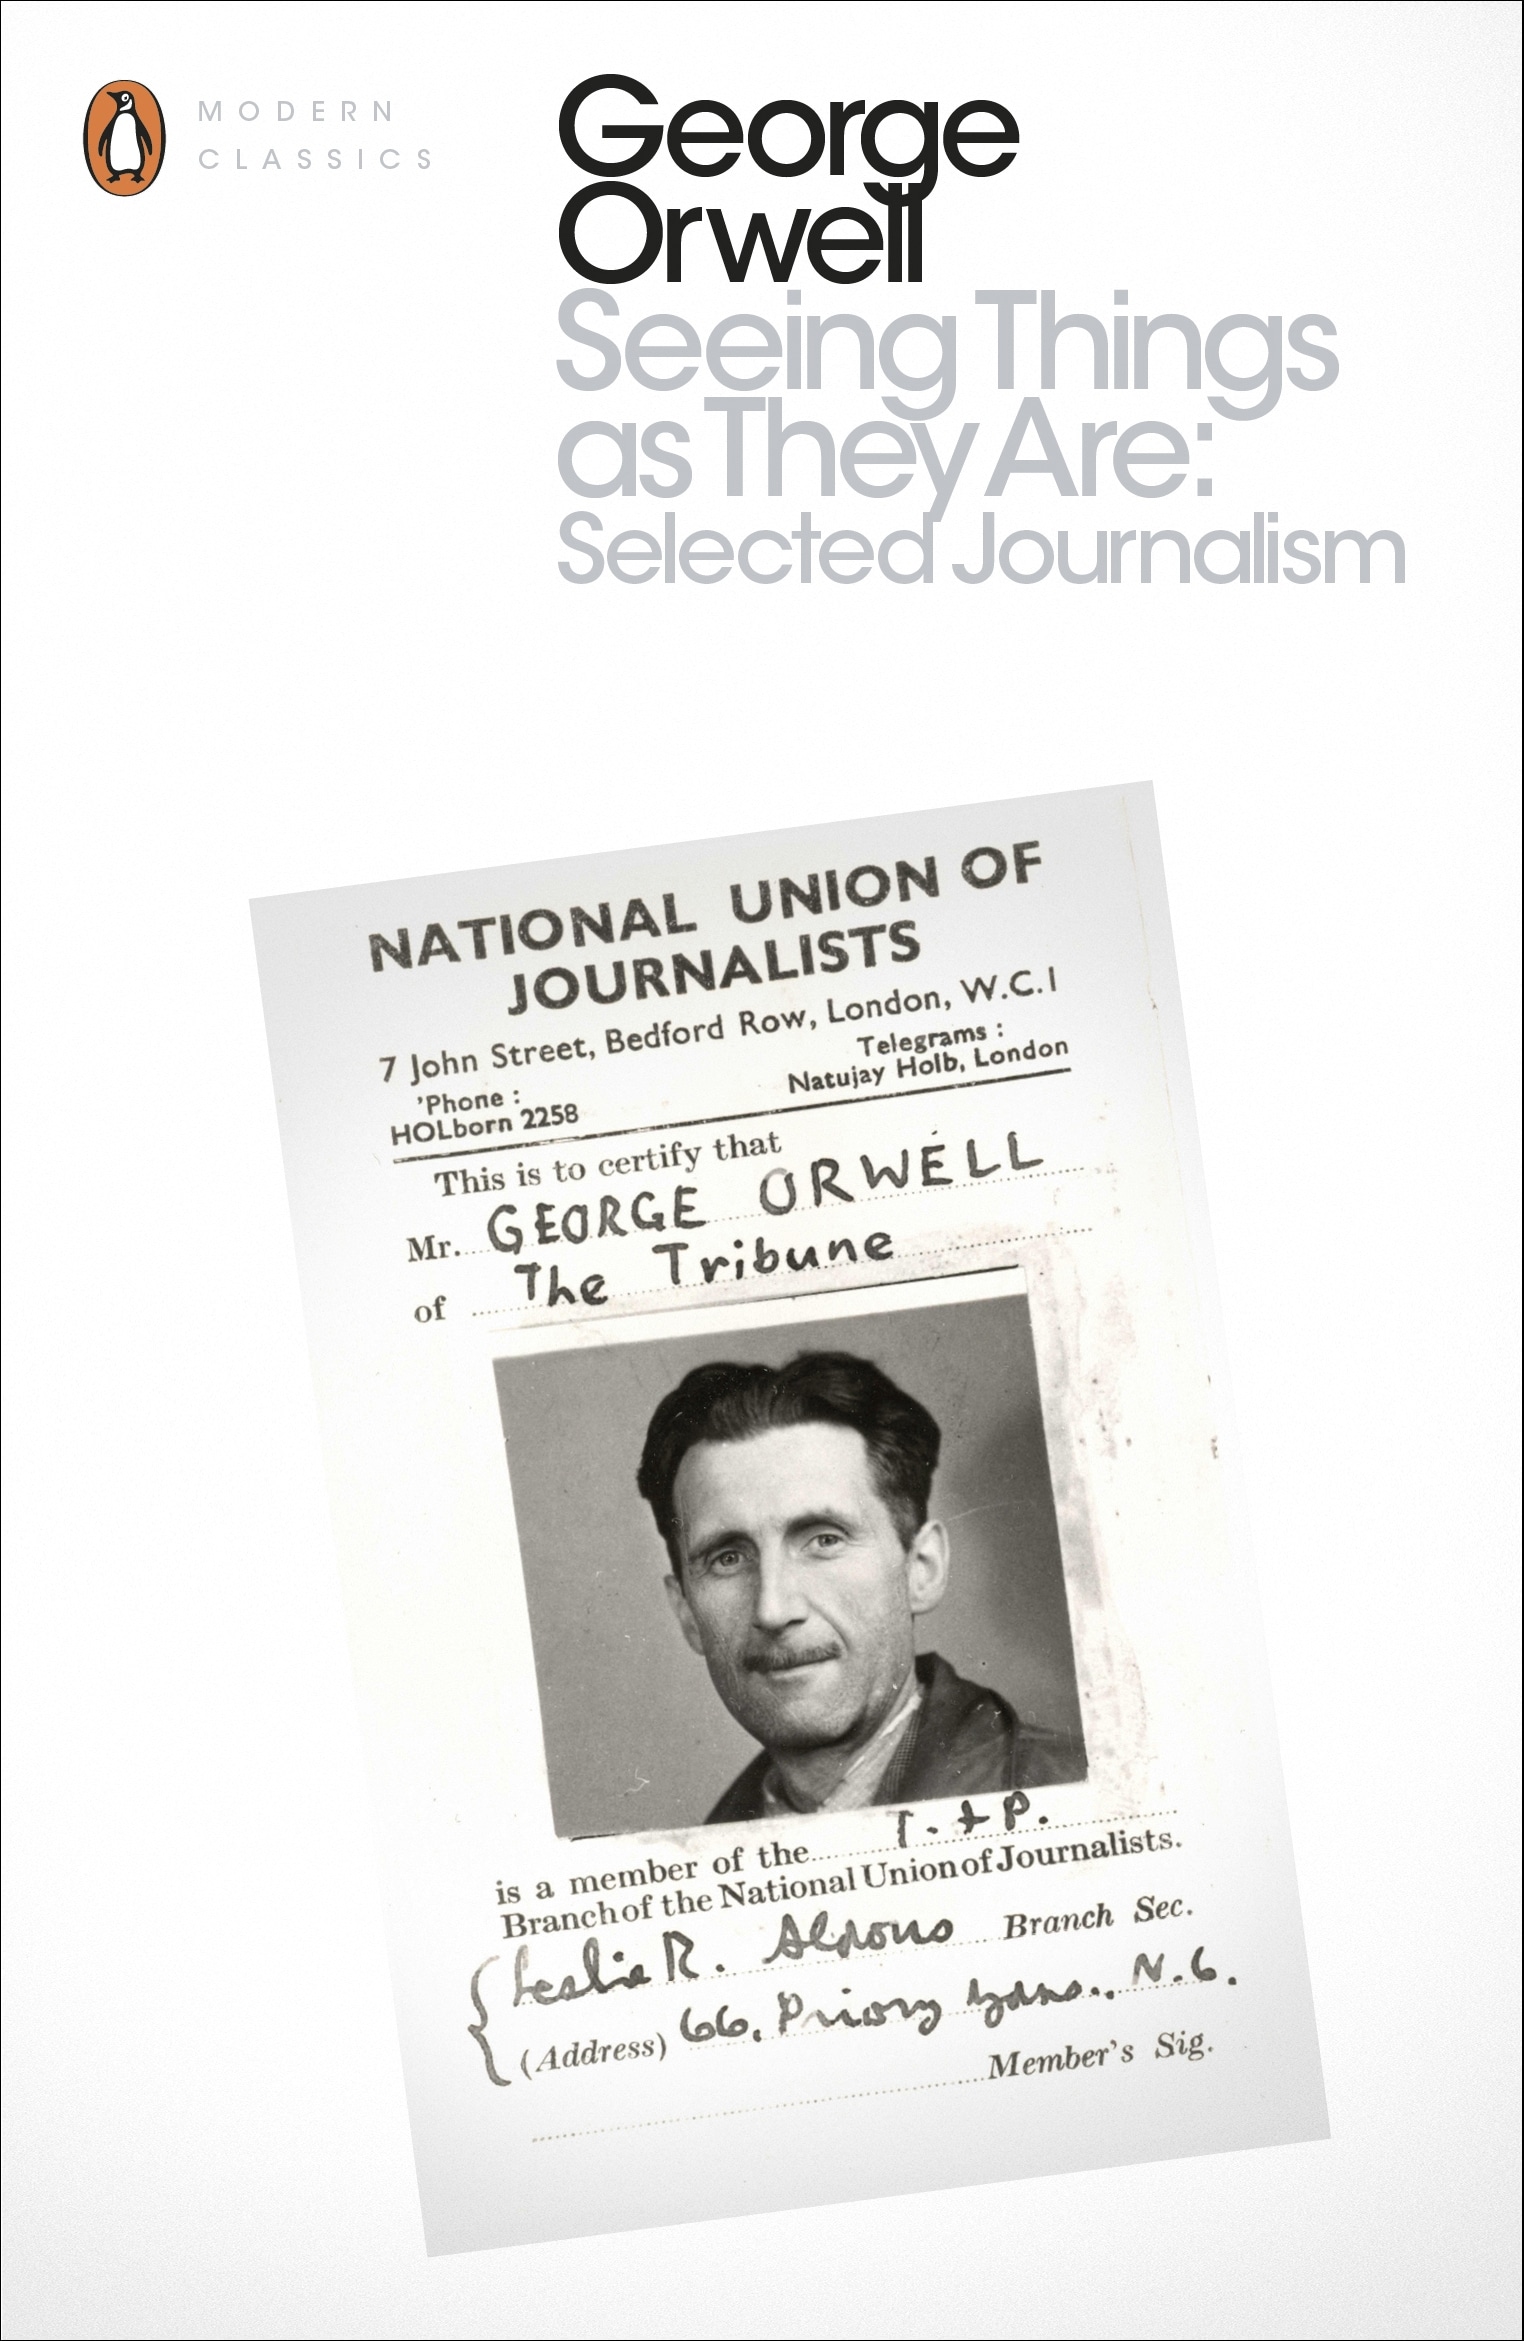 Book “Seeing Things as They Are: Selected Journalism and Other Writings” by George Orwell — August 25, 2016